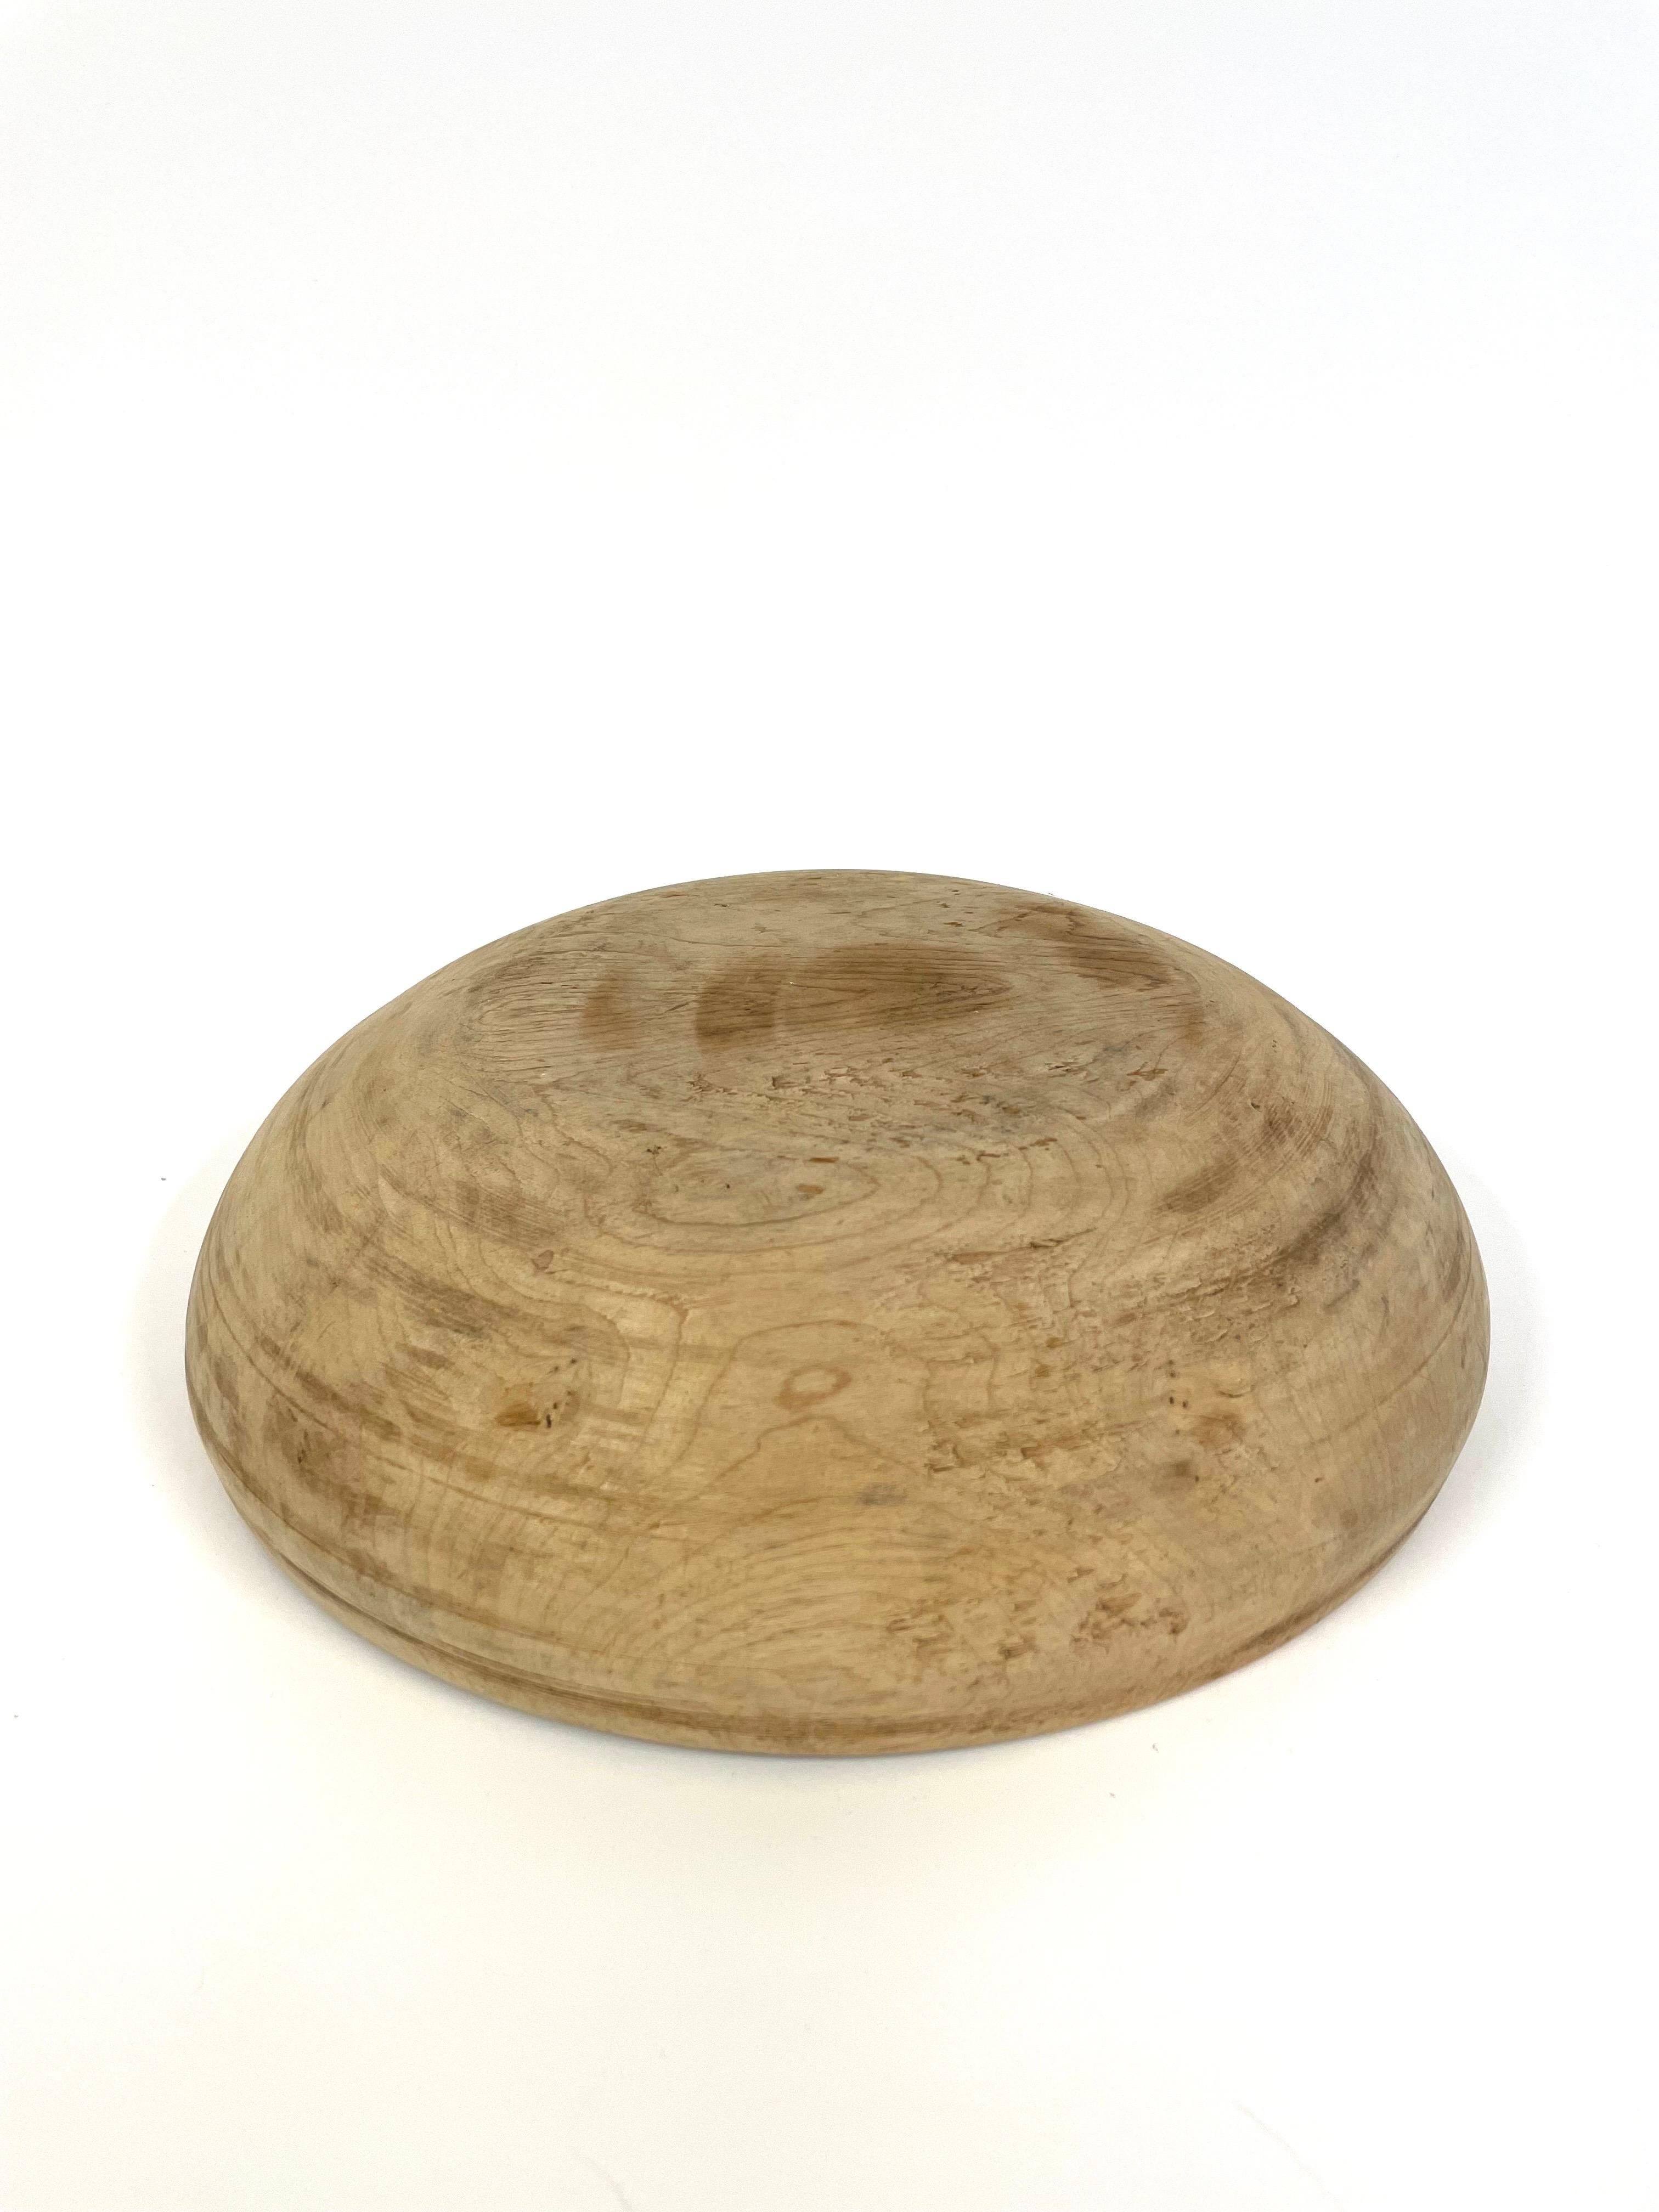 Swedish Hand-Krafted Turned 19th Century Wooden Folk Art Wooden Bowl in Pine  In Fair Condition For Sale In Örebro, SE